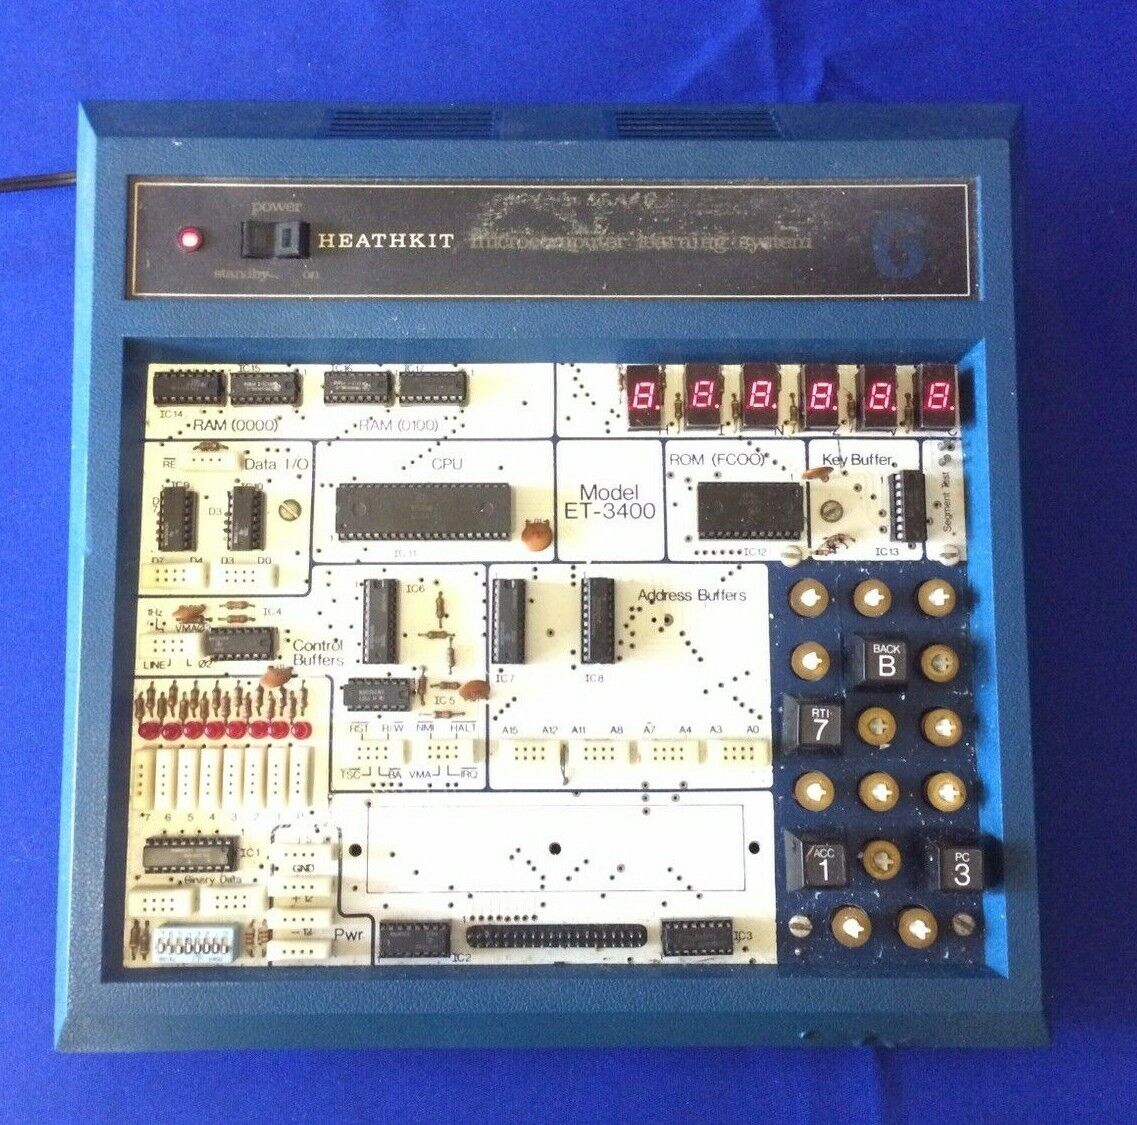 HEATHKIT ETW-3400 Microcomputer Learning System - POWERS ON - FOR PARTS/REPAIR